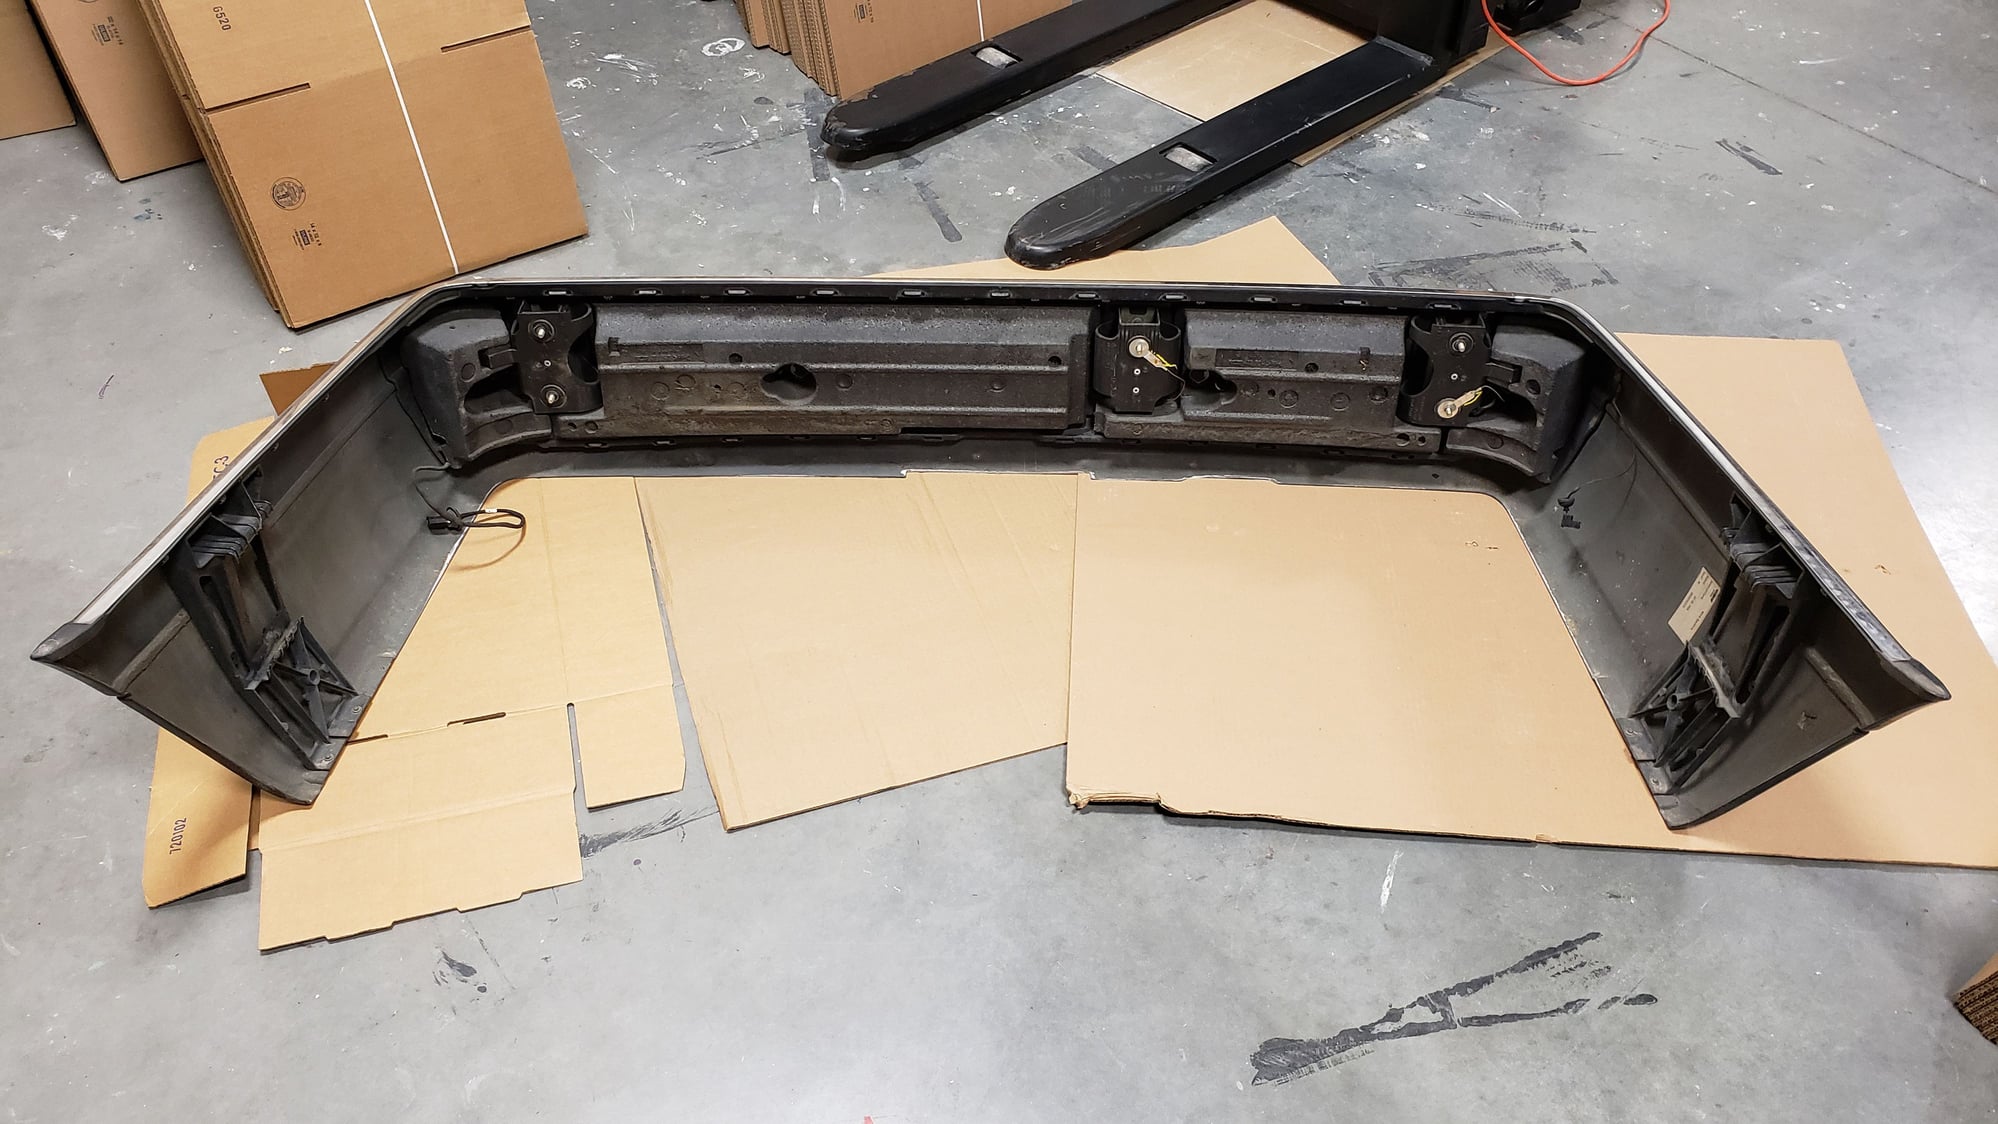 Exterior Body Parts - Looking for 97, 98, 99 W140 Sedan Bumpers and S600 stock Exhaust - Used - 1997 to 1999 Mercedes-Benz S600 - Bear, DE 19701, United States